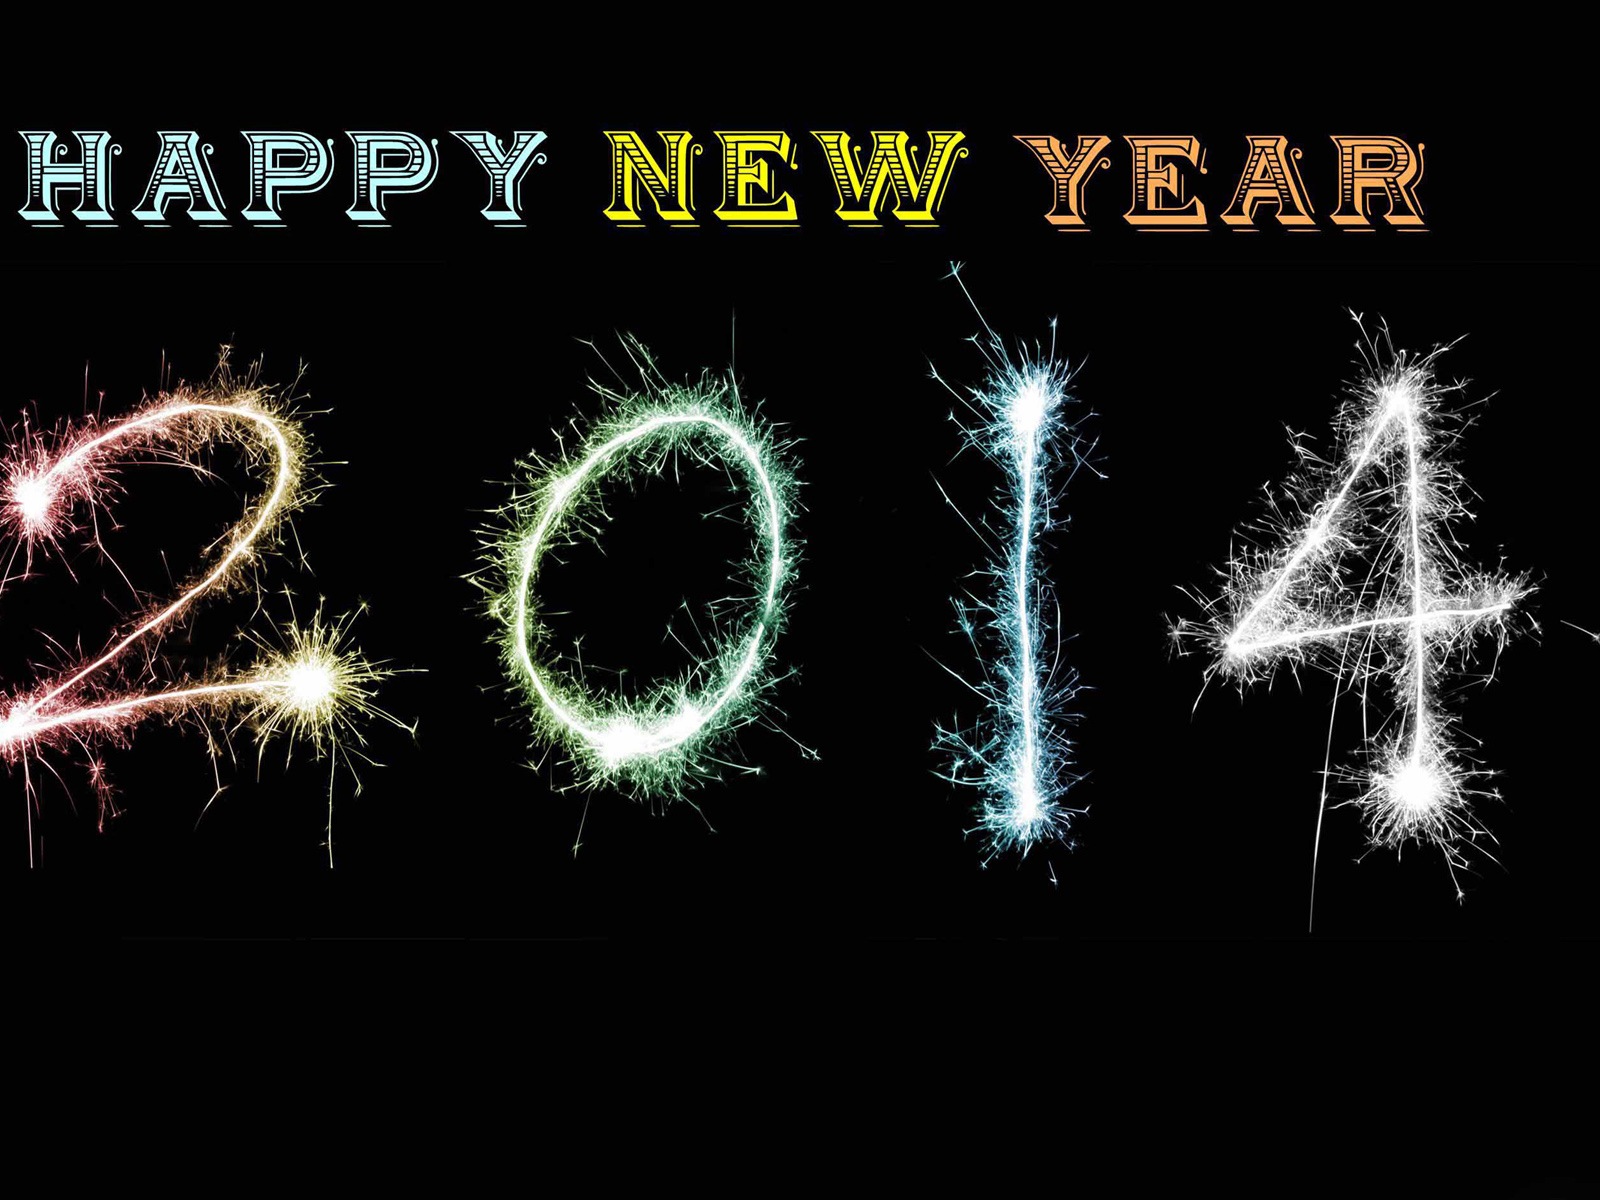 2014 New Year Theme HD Wallpapers (2) #12 - 1600x1200